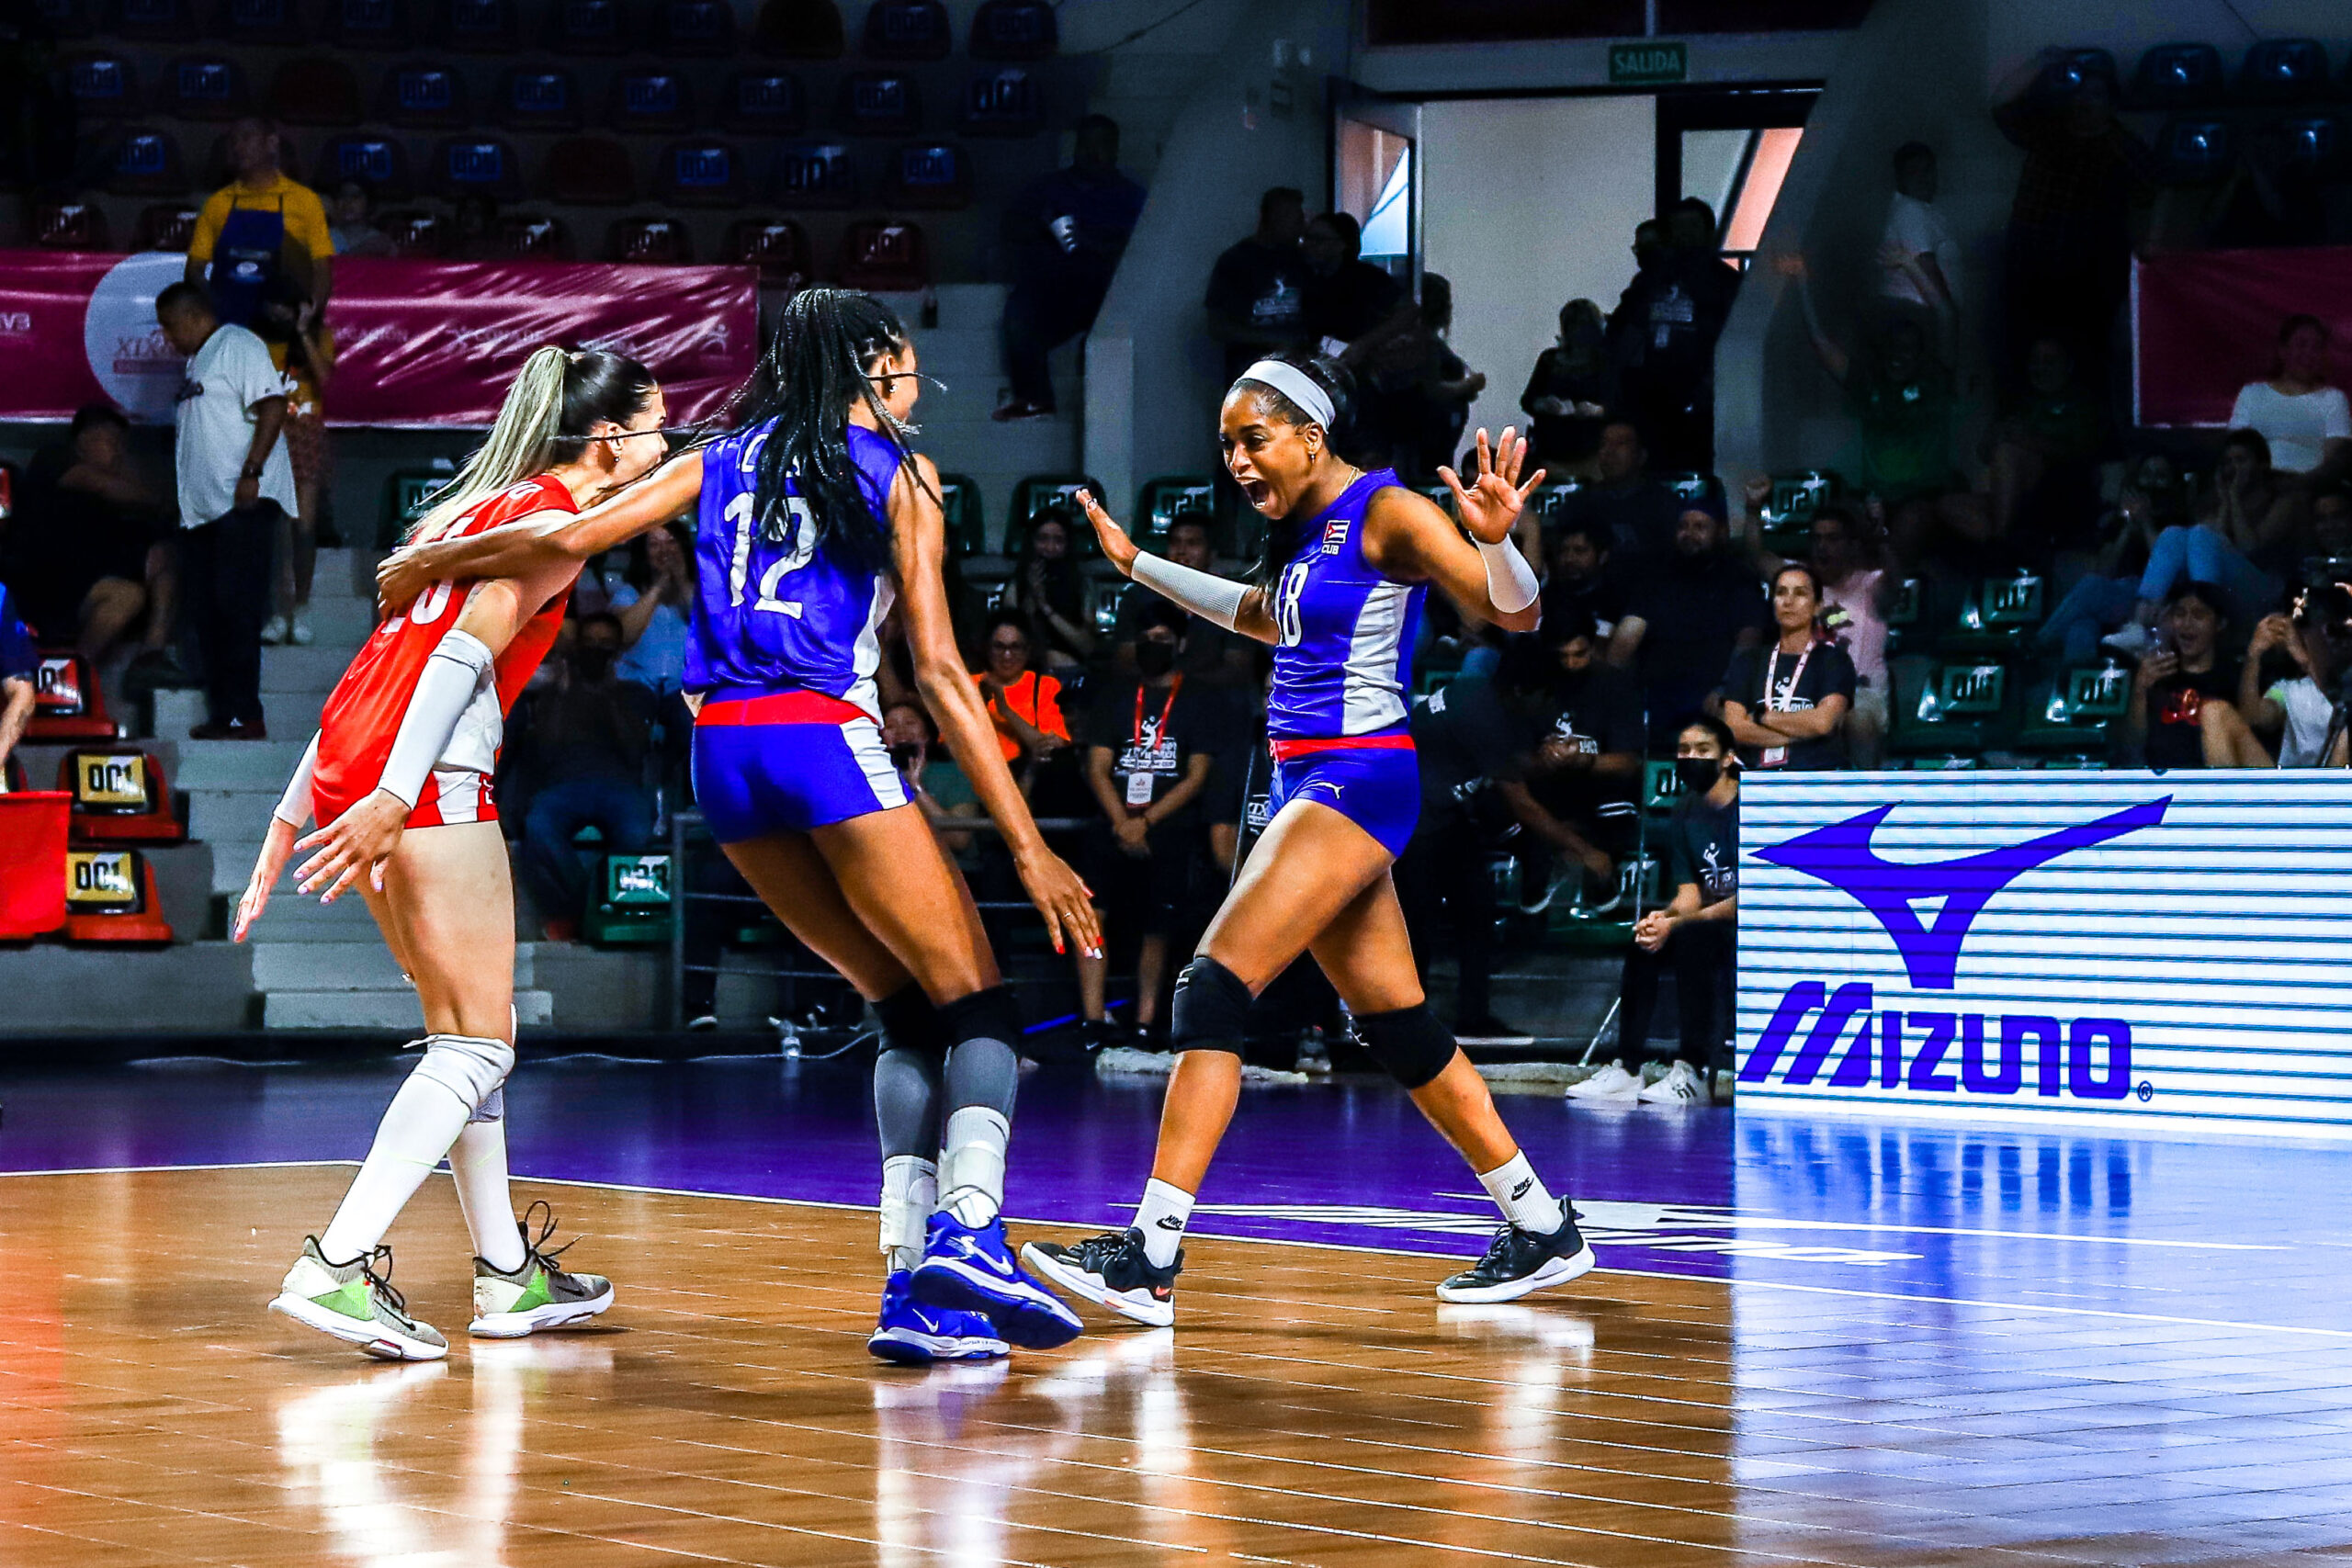 Cuba wins exciting match to Canada in Pan Am Cup debut